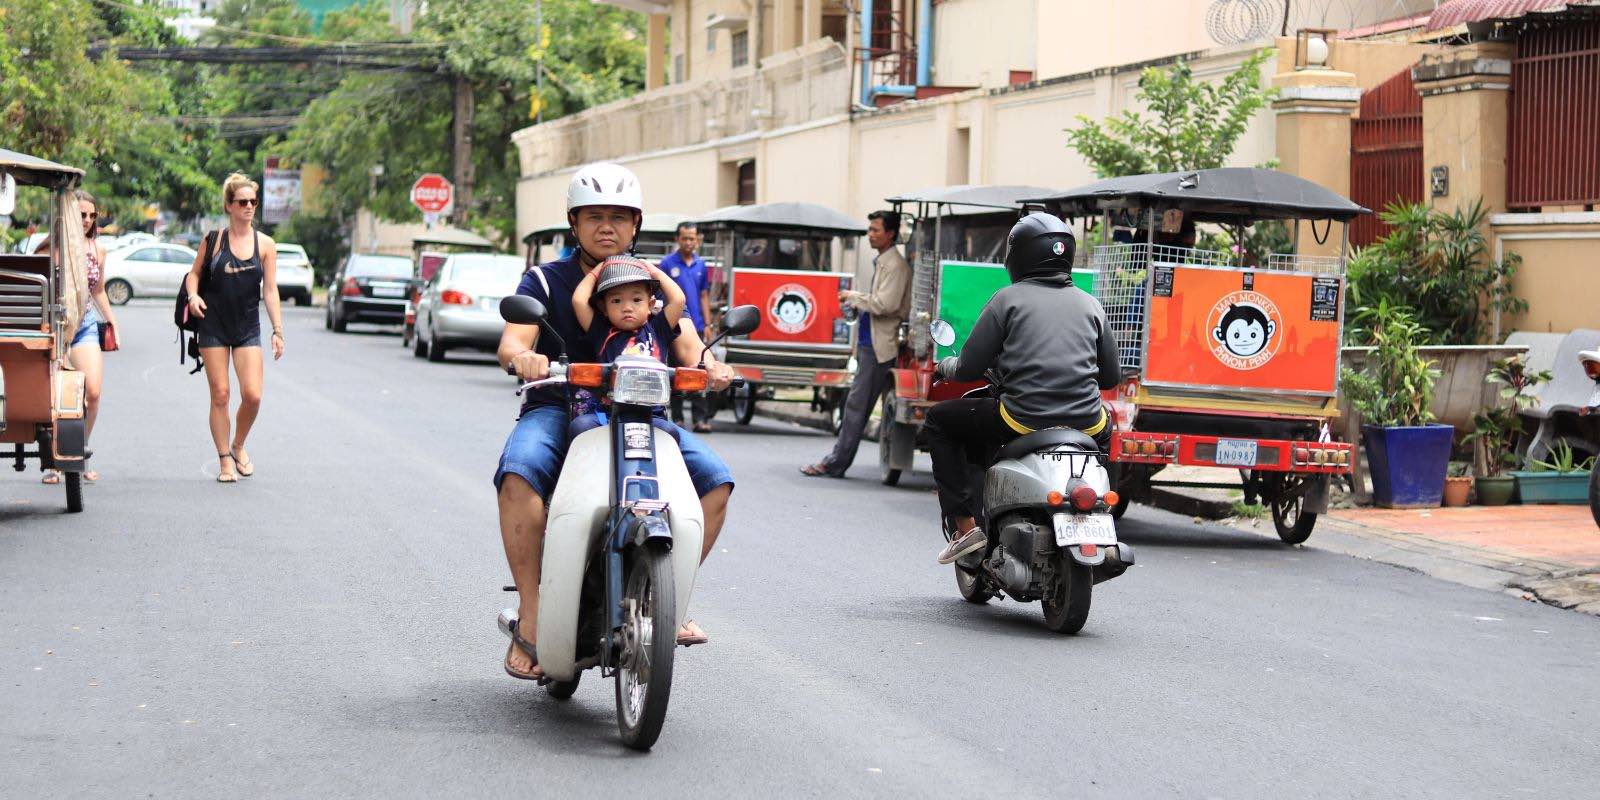 locals riding motorcycles and tourists walking in a street in Cambodia